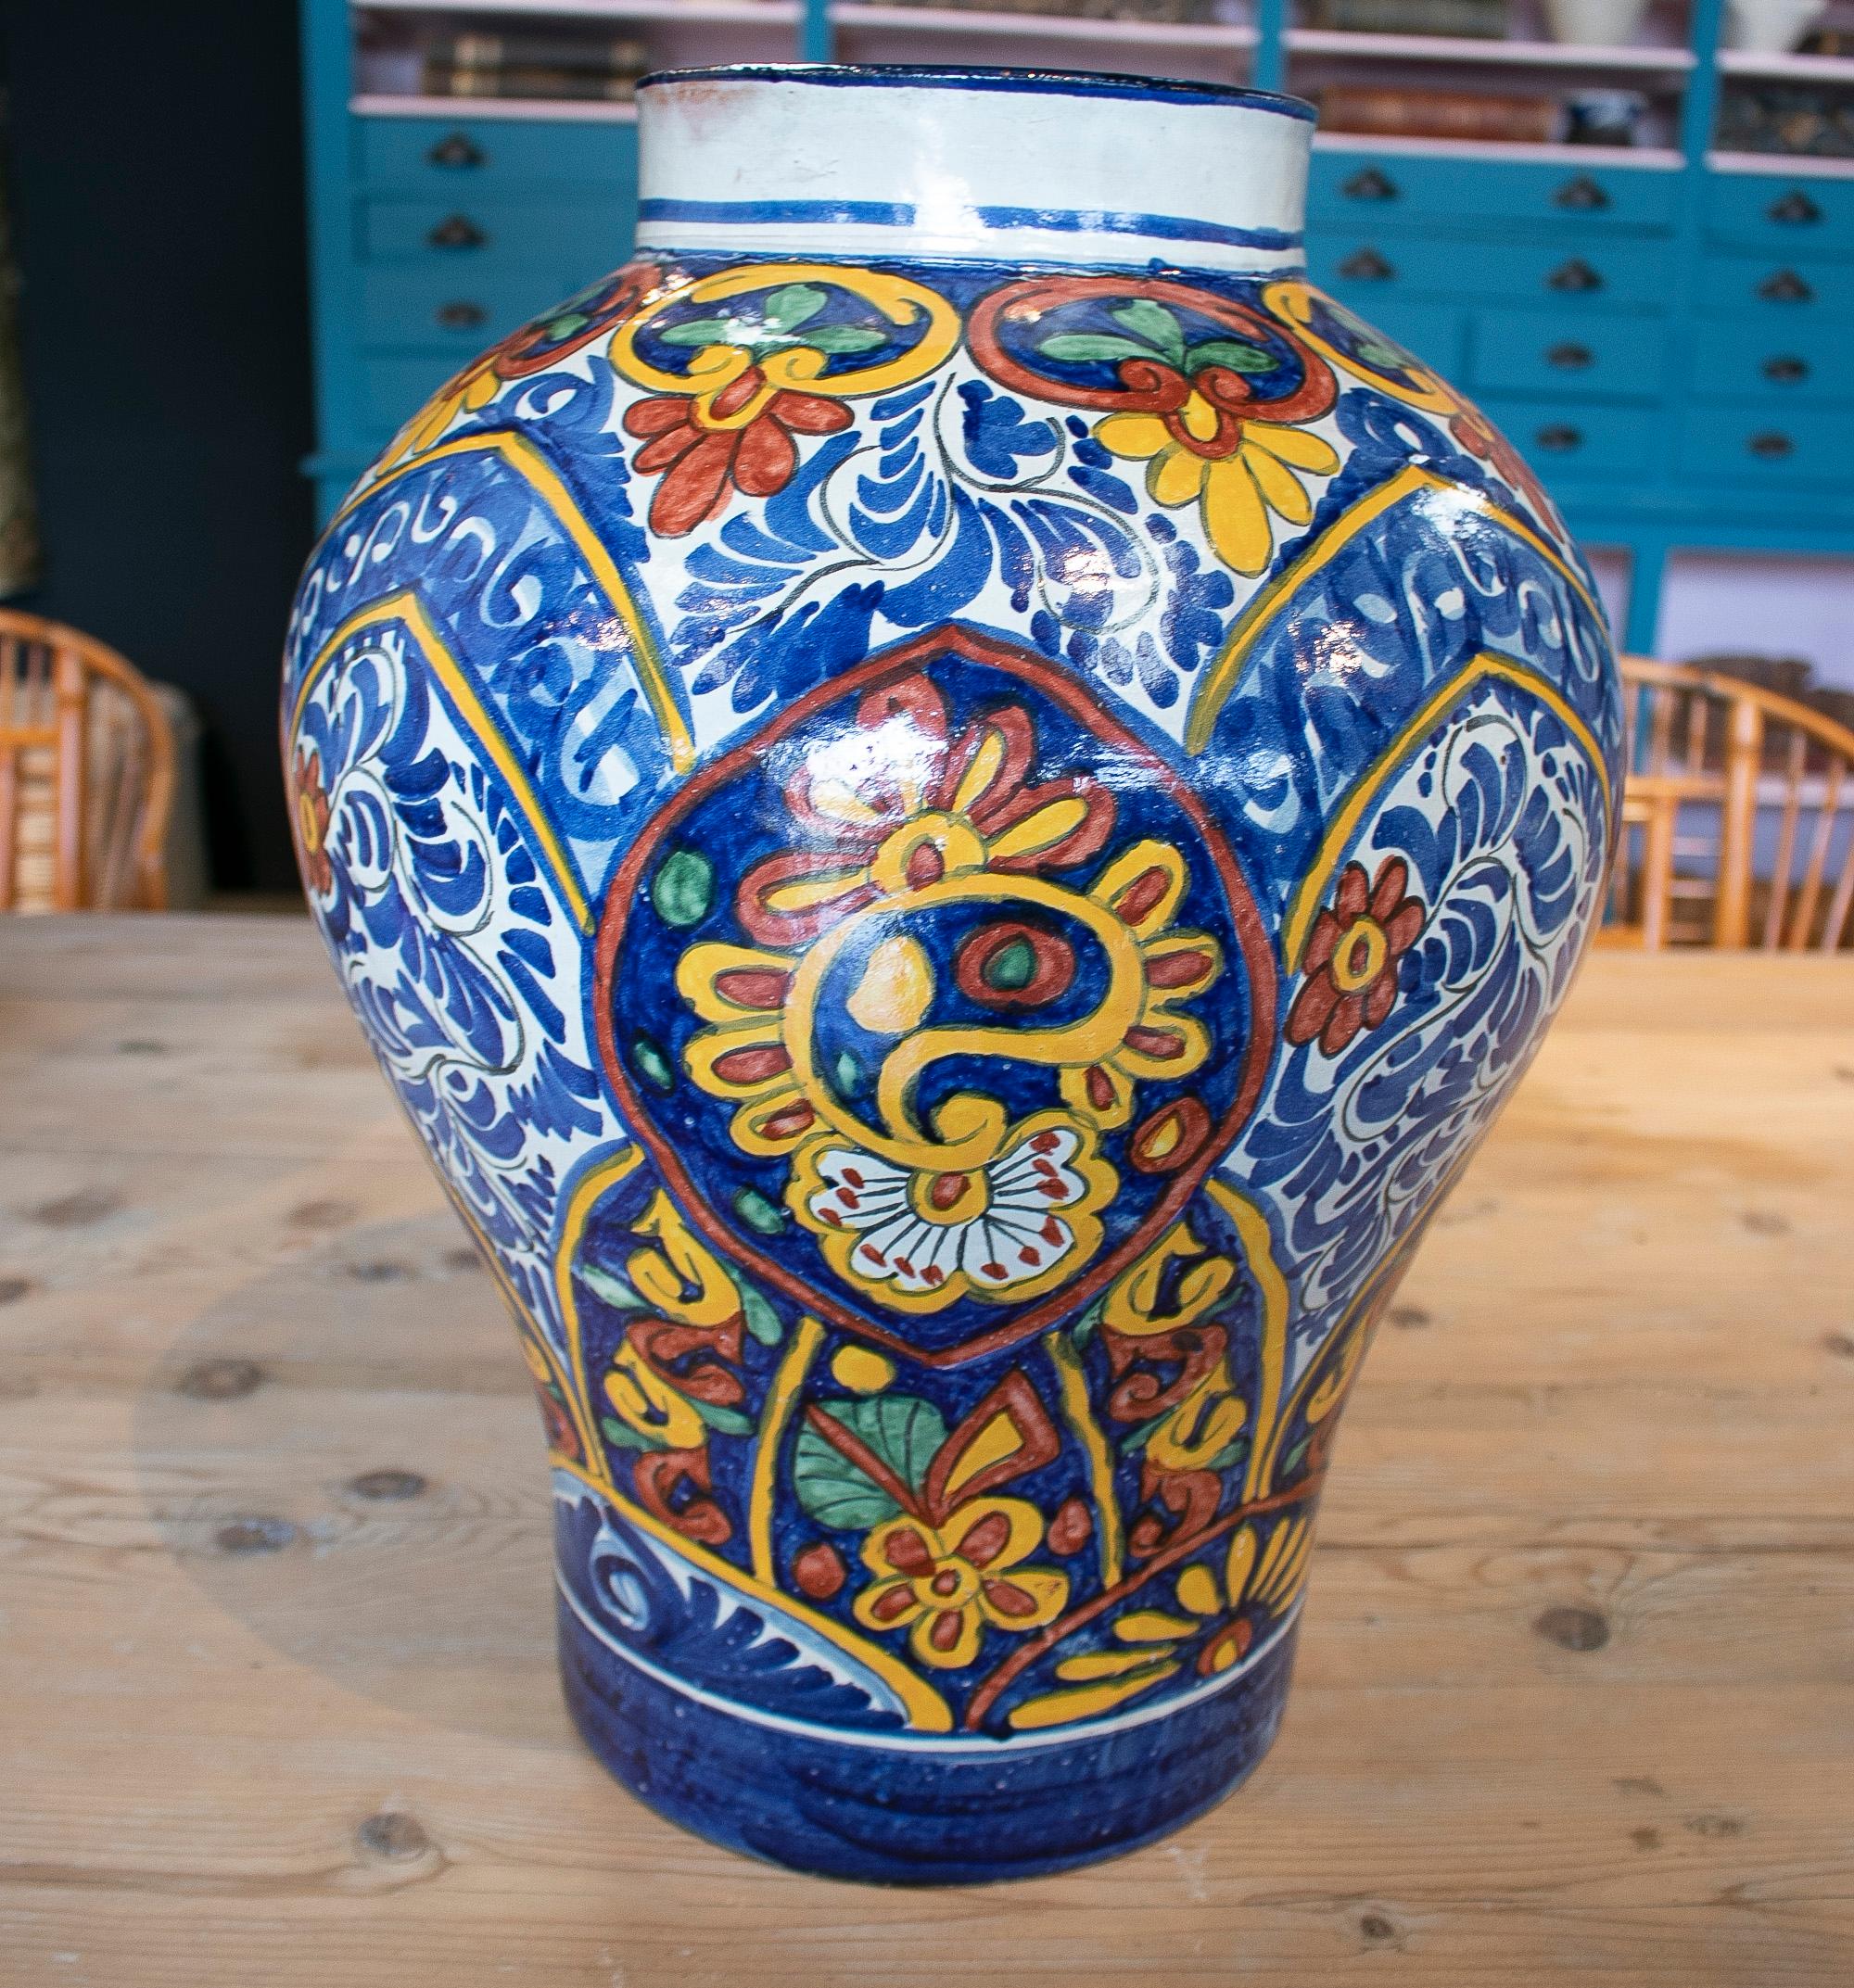 Antique 19th century Spanish handmade traditional ceramic vase with ornamental white, blue and yellow flower inspired patterns. Signed Alba H. Ennex.
  